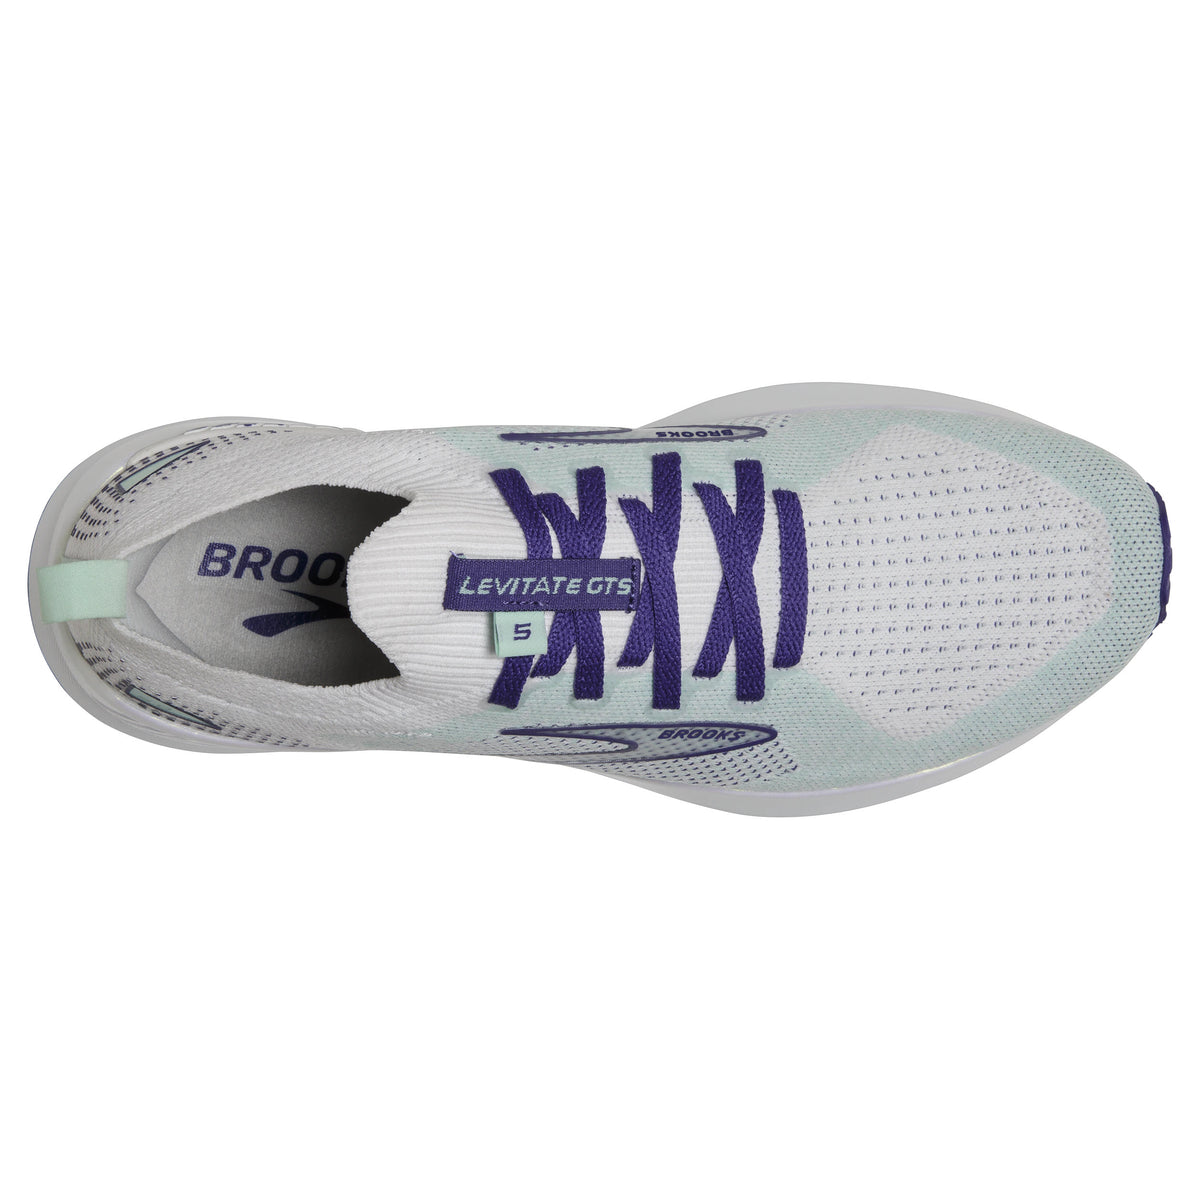 Top view of a white and purple Brooks Levitate Stealthfit GTS 5 running shoe.